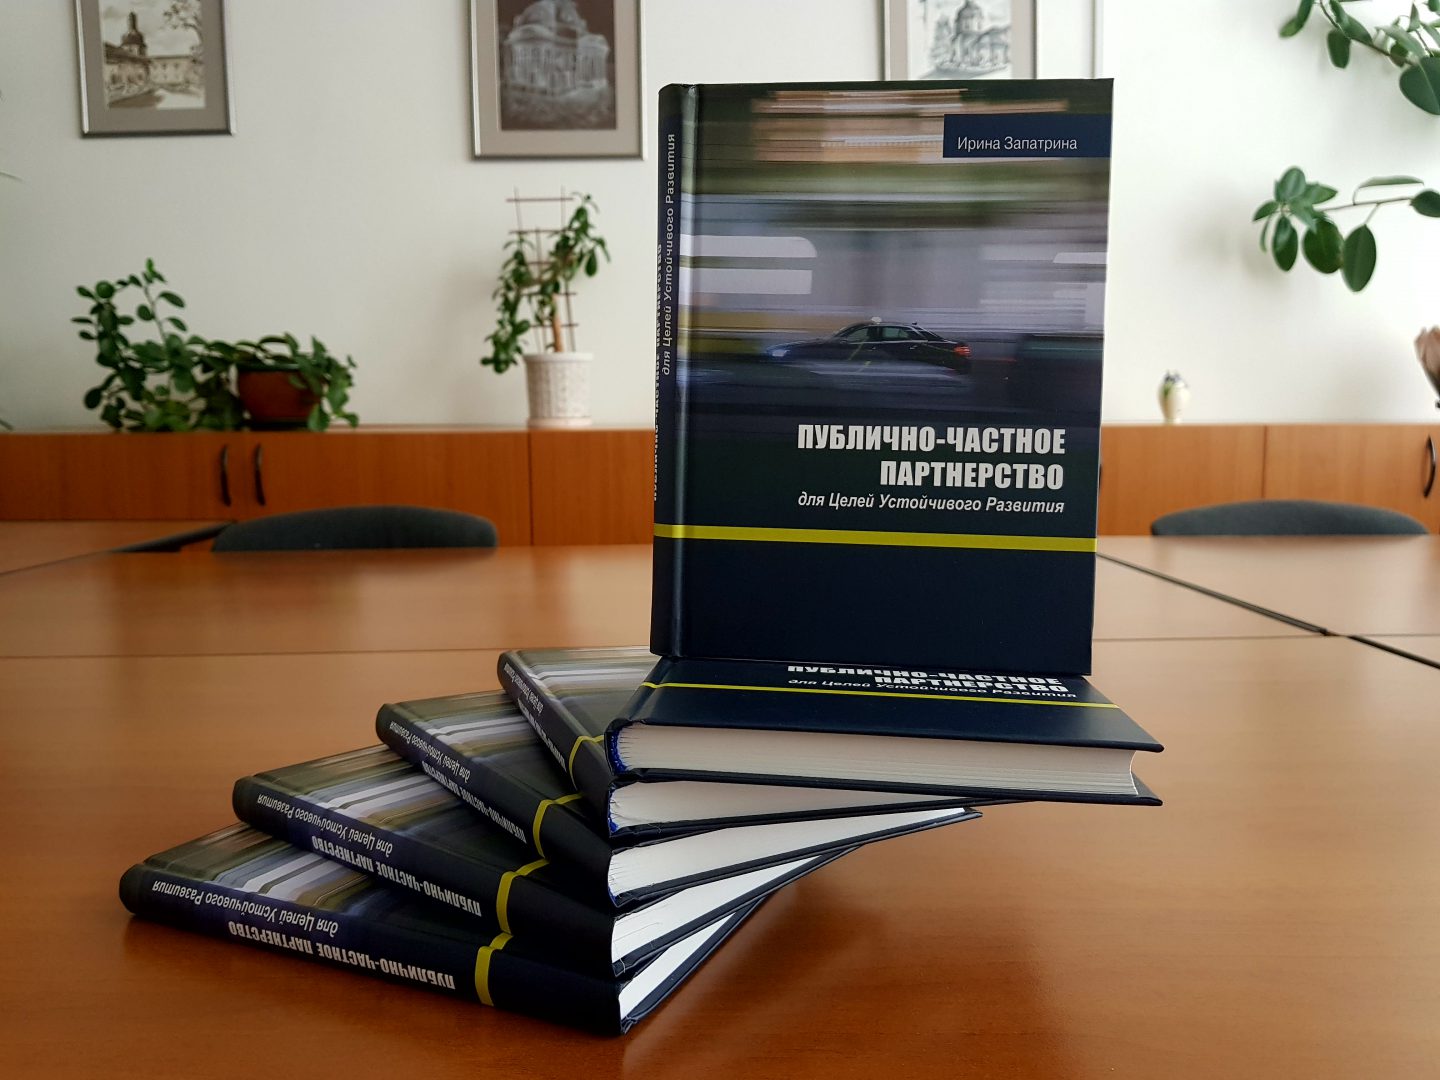 It was published a monograph of the Chaiman of the Board of the Center Iryna Zapatrina “Public-Private Partnership for Sustainable Development Goals”